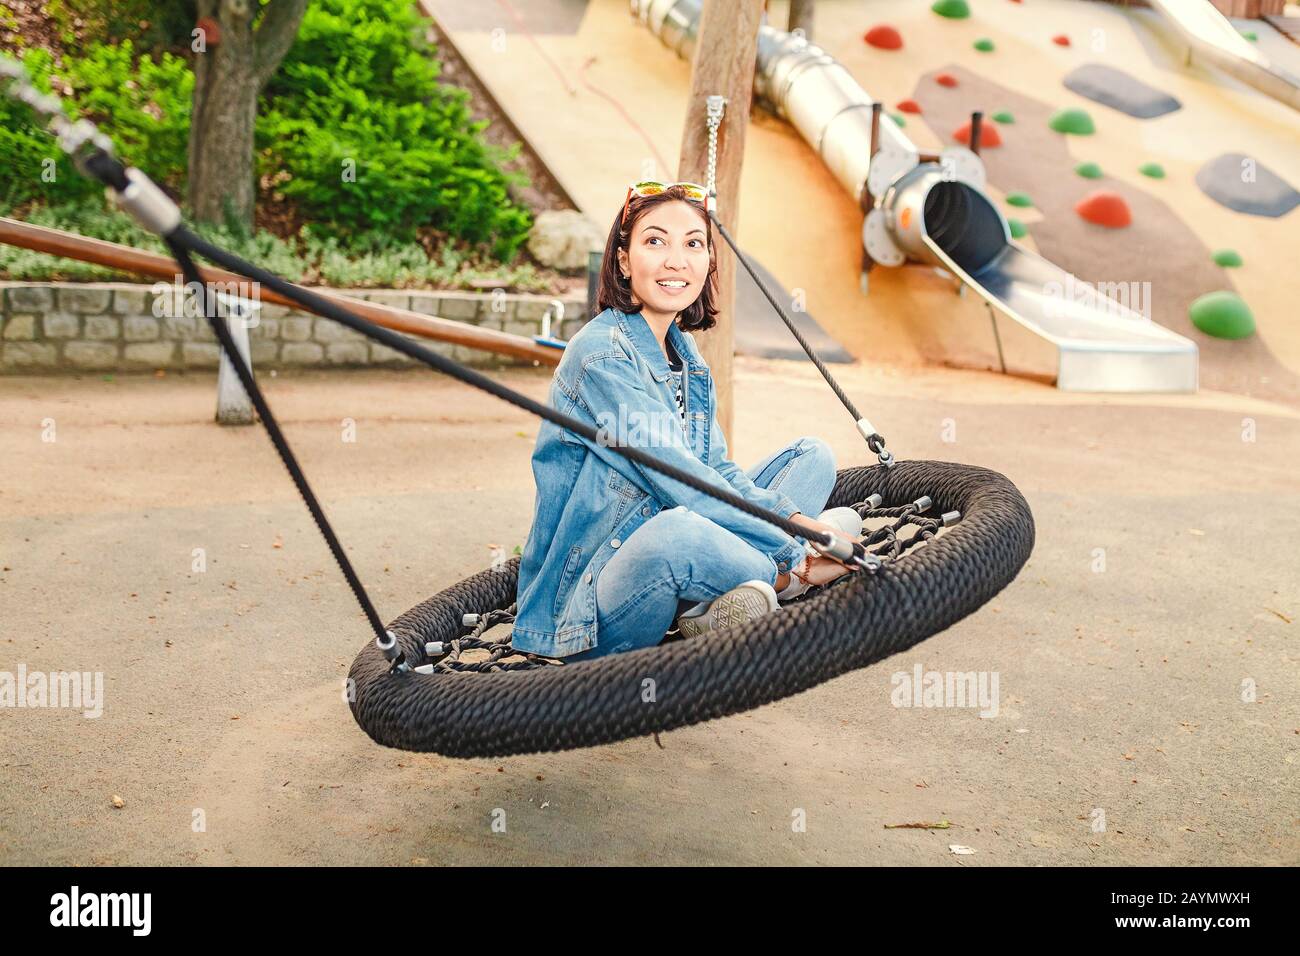 young woman having fun on a seesaw swing at urban playground Stock Photo